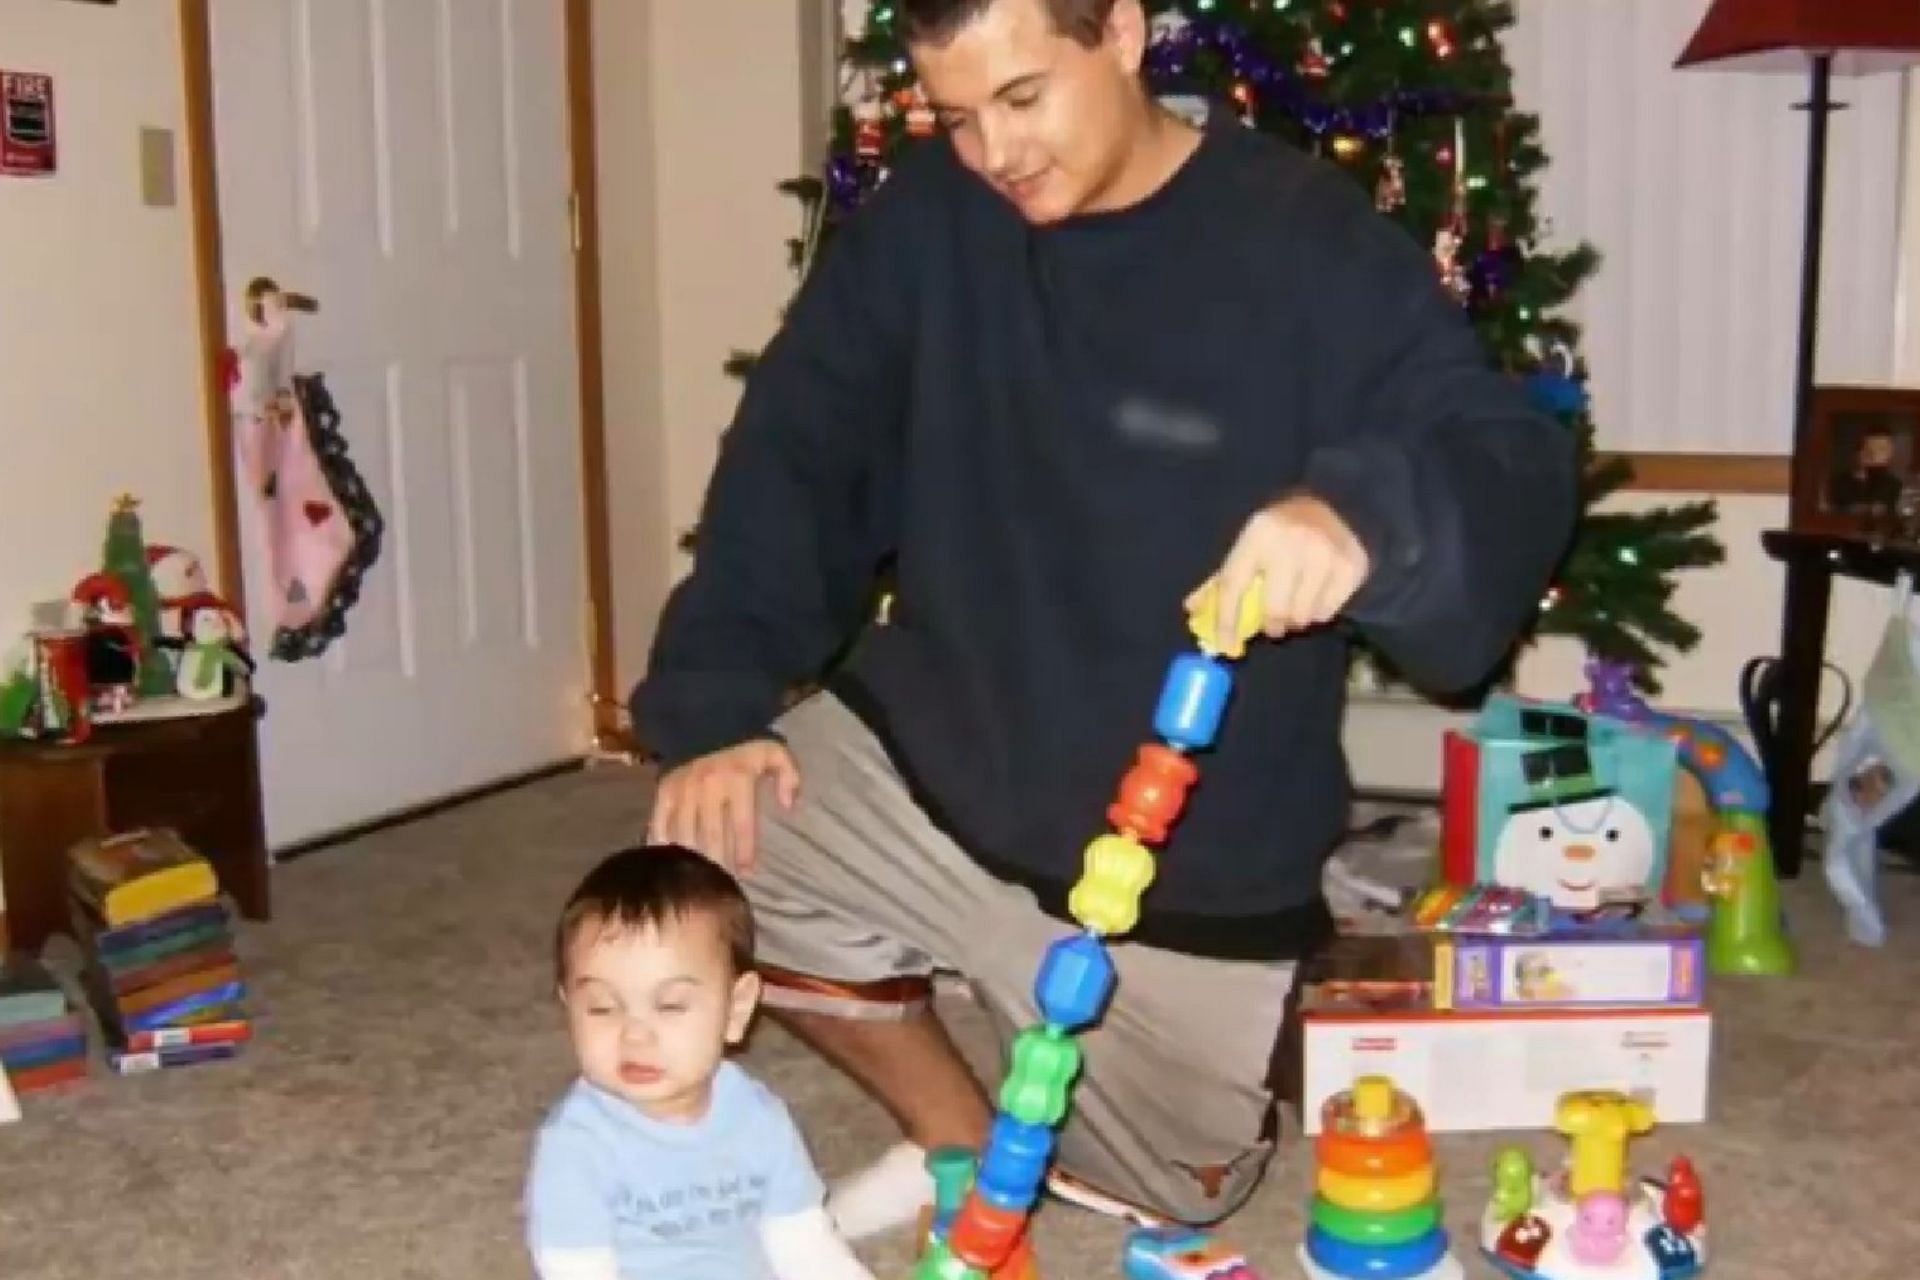 Gabriel Campos pictured playing with his young son (Image via @CrimesReais/Twitter)